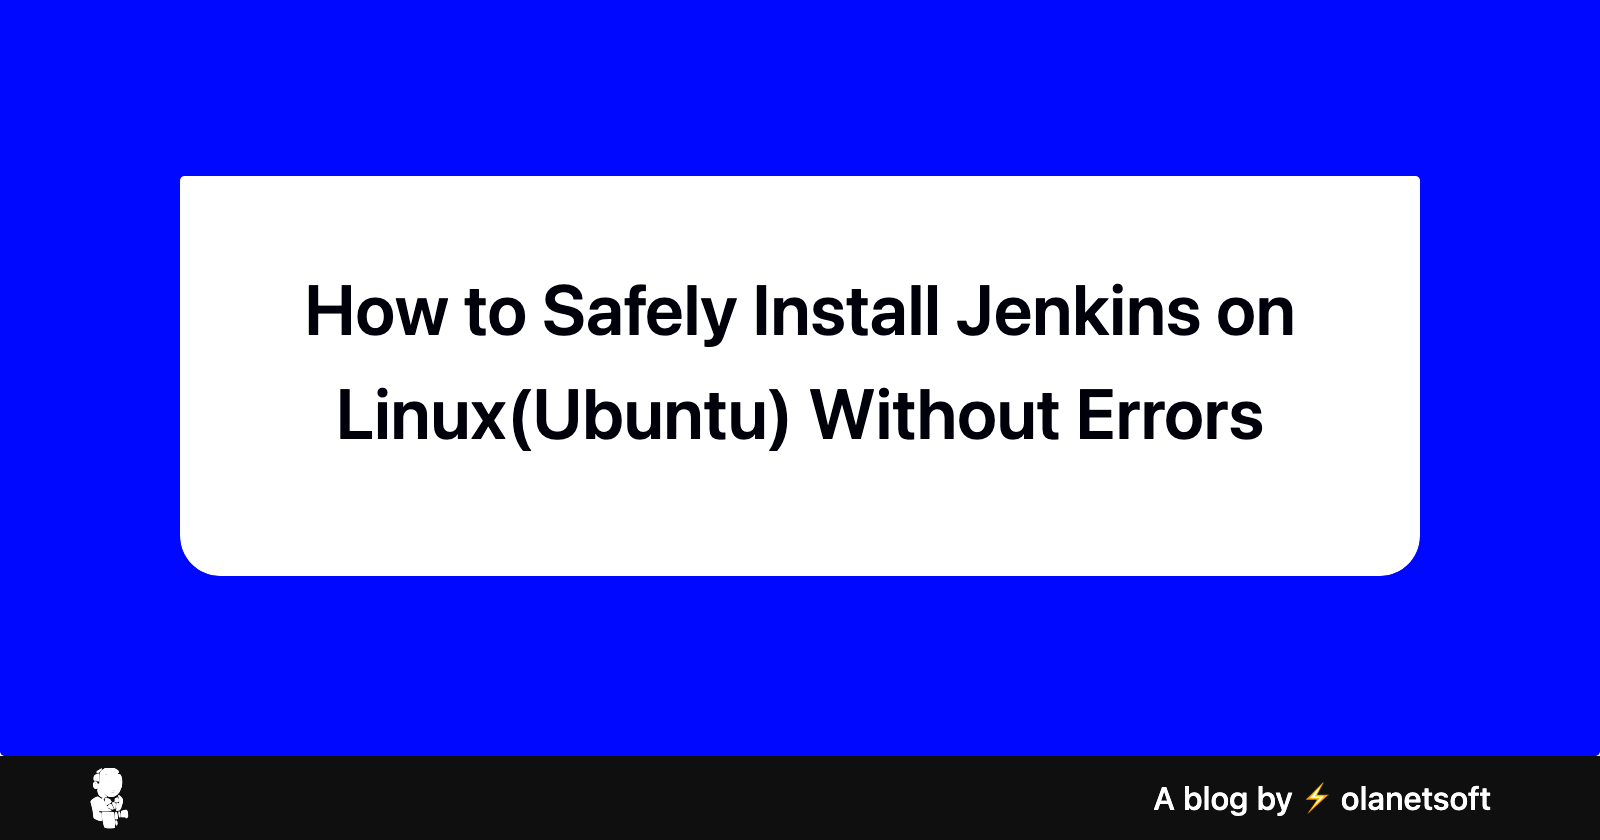 How to Safely Install Jenkins on Linux(Ubuntu) Without Errors